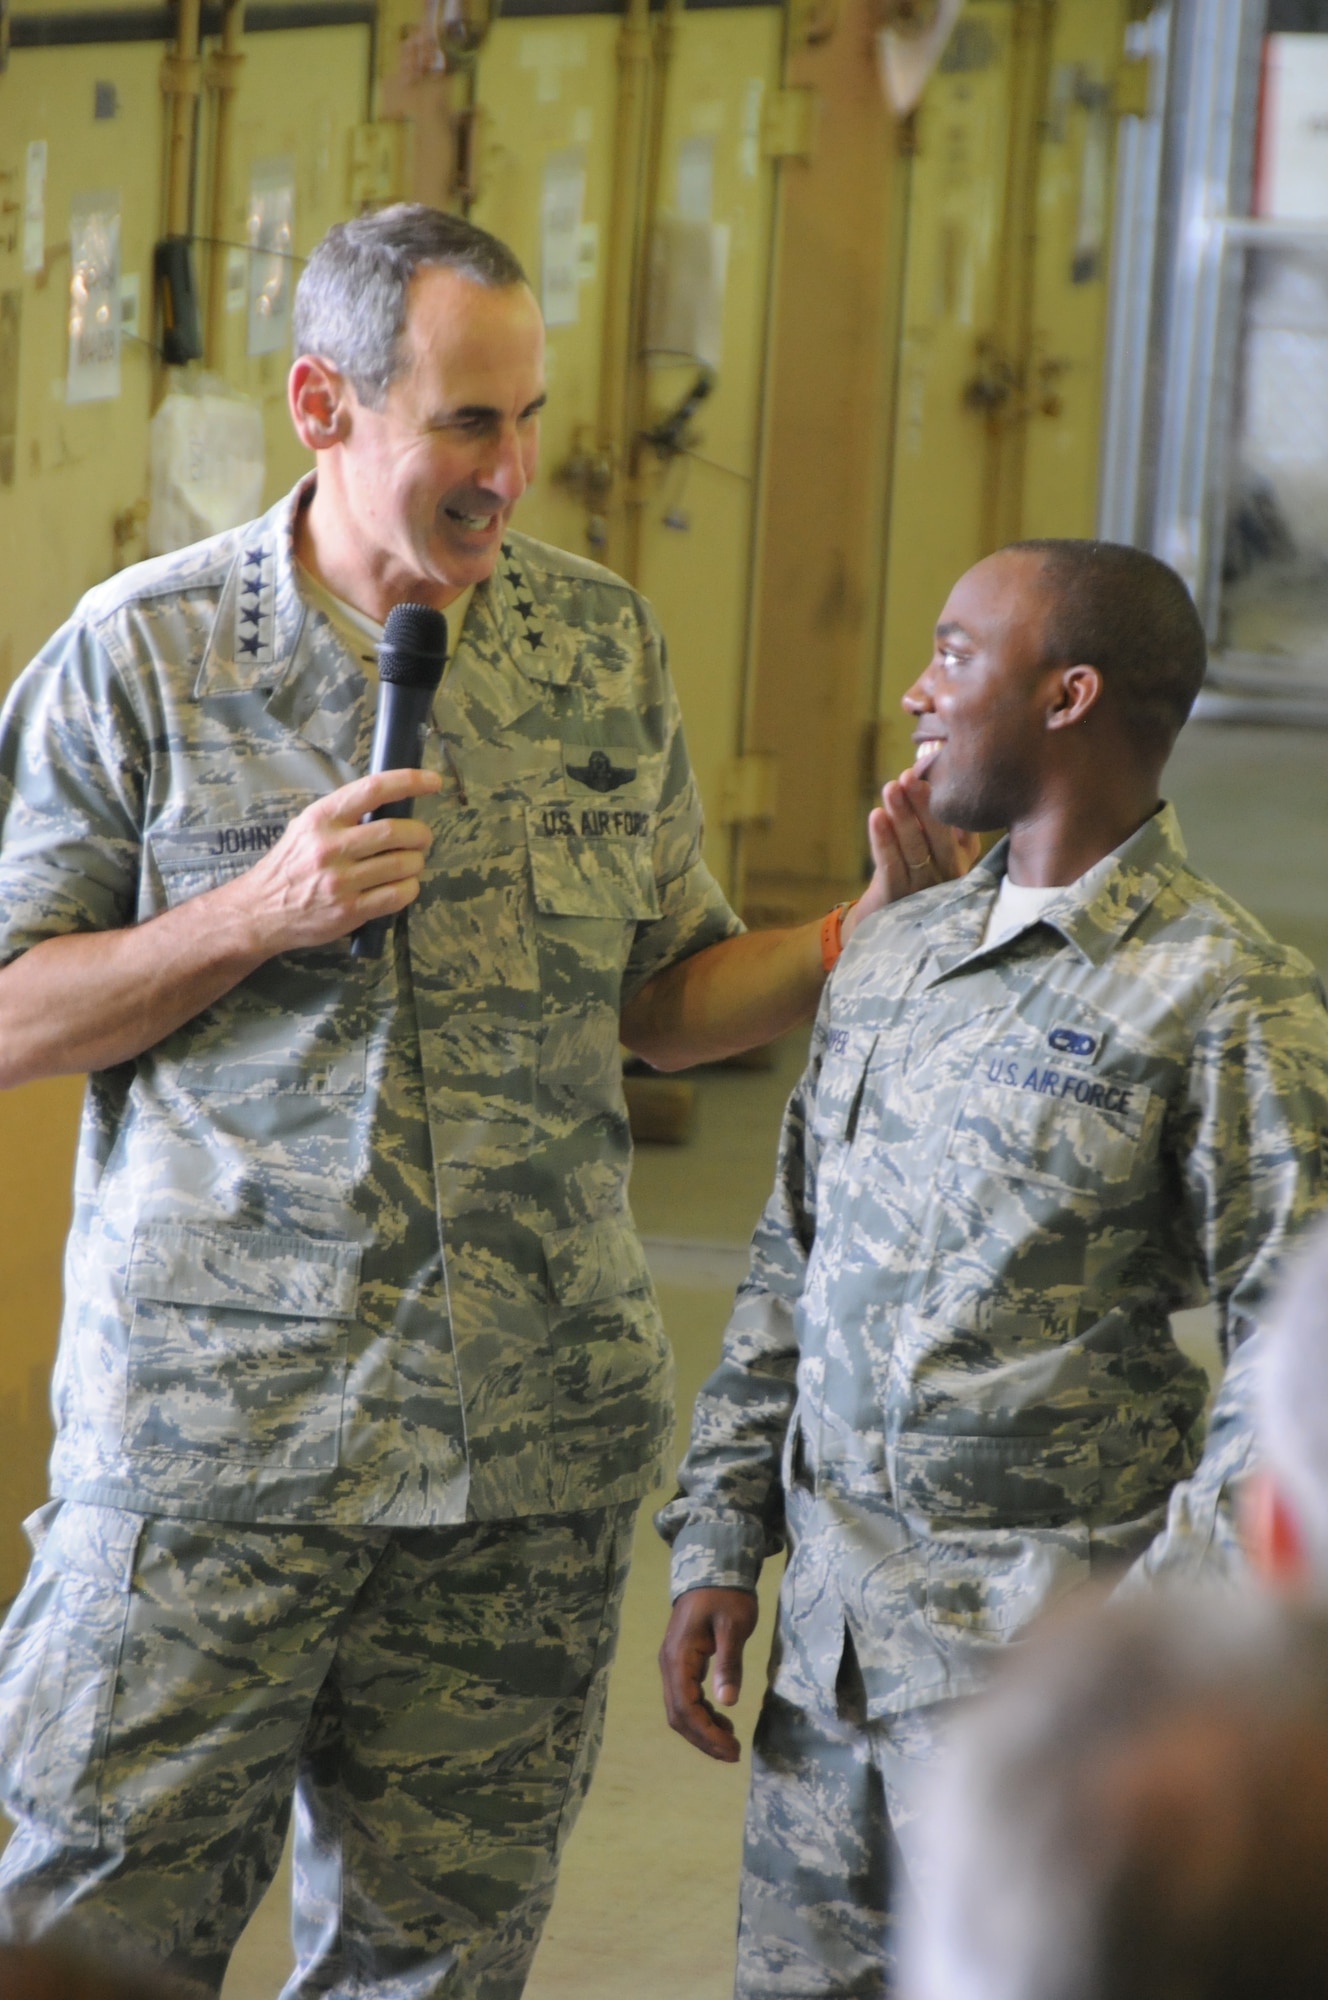 Gen. Raymond E. Johns Jr., Air Mobility Command commander, congratulates Staff Sgt. Demetrius Cooper of the 313th Air Expeditionary Wing on aircraft maintenance improvements at a non-disclosed base in Western Europe on Aug. 16, 2011. The general answered questions and addressed issues and concerns and also thanked Airmen for their service and the ability to answer the nation's call at a moments notice. The wing supports Operation Unified Protector, a NATO-led mission in Libya to protect civilians and civilian-populated areas under threat of attack. The 313th AEW provides aerial refueling to U.S. and coalition aircraft with KC-135 Stratotankers and KC-10 Extenders. (U.S. Air Force Photo/1st Lt. Rusty Ridley)